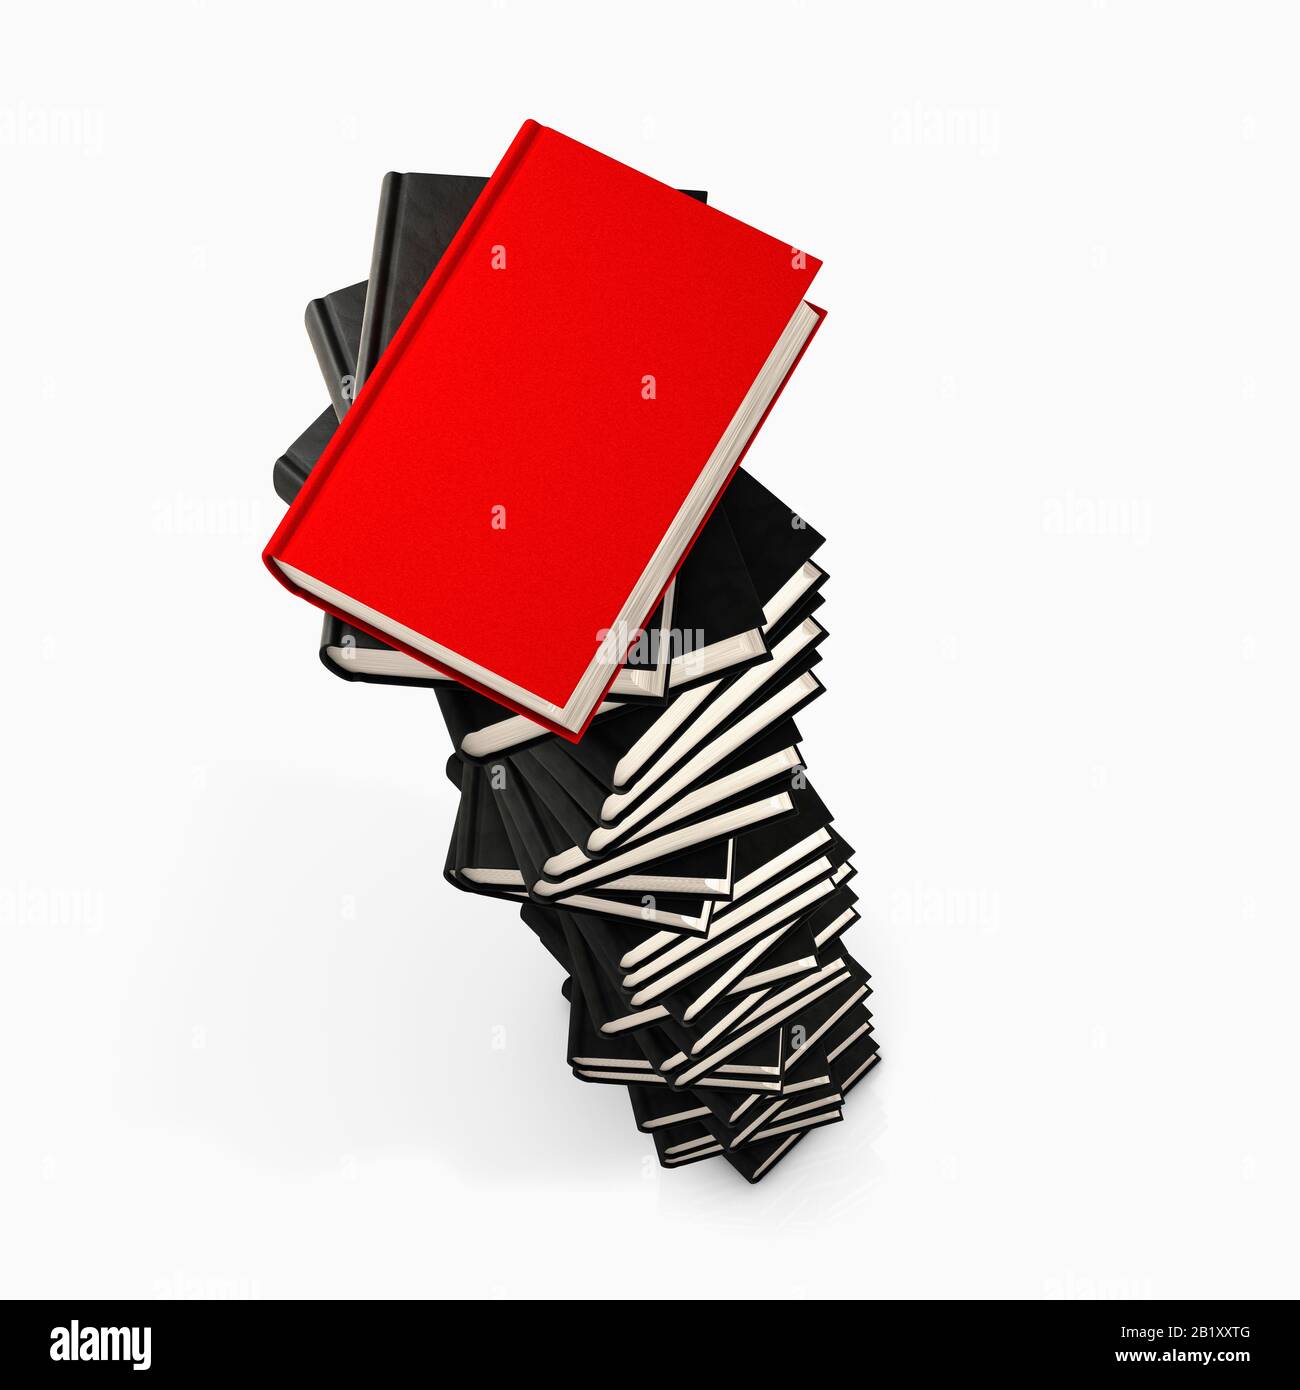 Tall stack of books, book tower with blank black covers but top book is red, difference or achievement concept Stock Photo